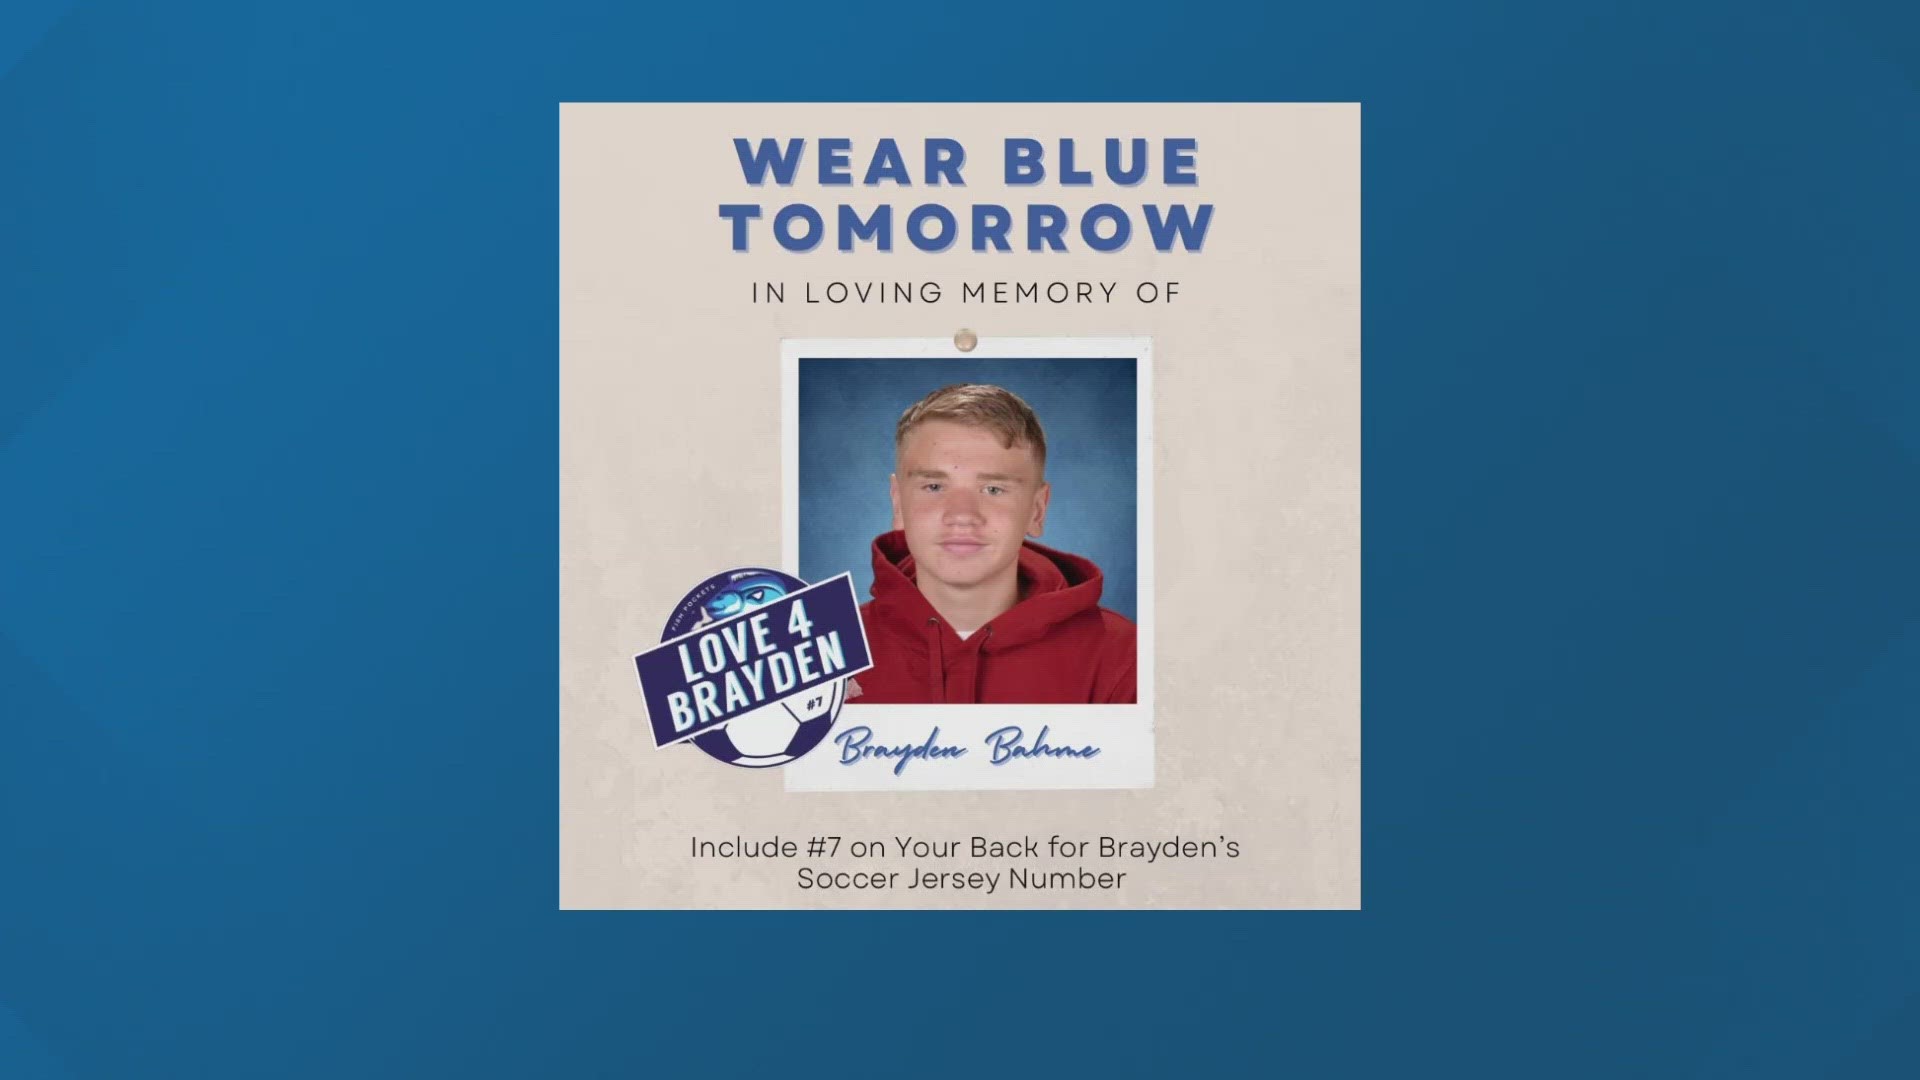 The vigil to honor Cheney High School sophomore Brayden Bahme is taking place at Crunk's Field in Cheney at 6 p.m. on Monday.